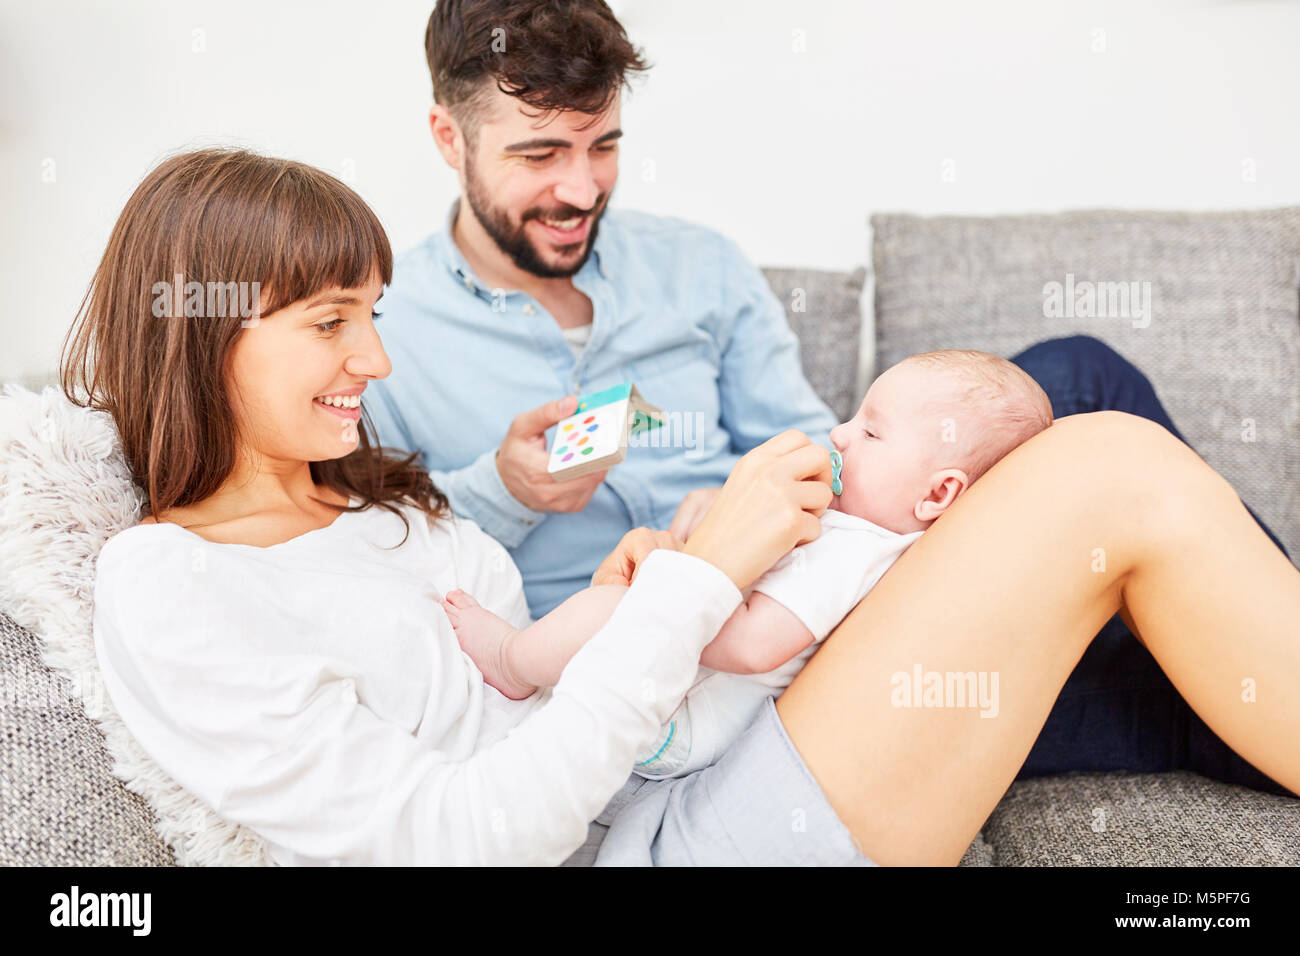 Parents sit together with newborn baby on the sofa at home Stock Photo